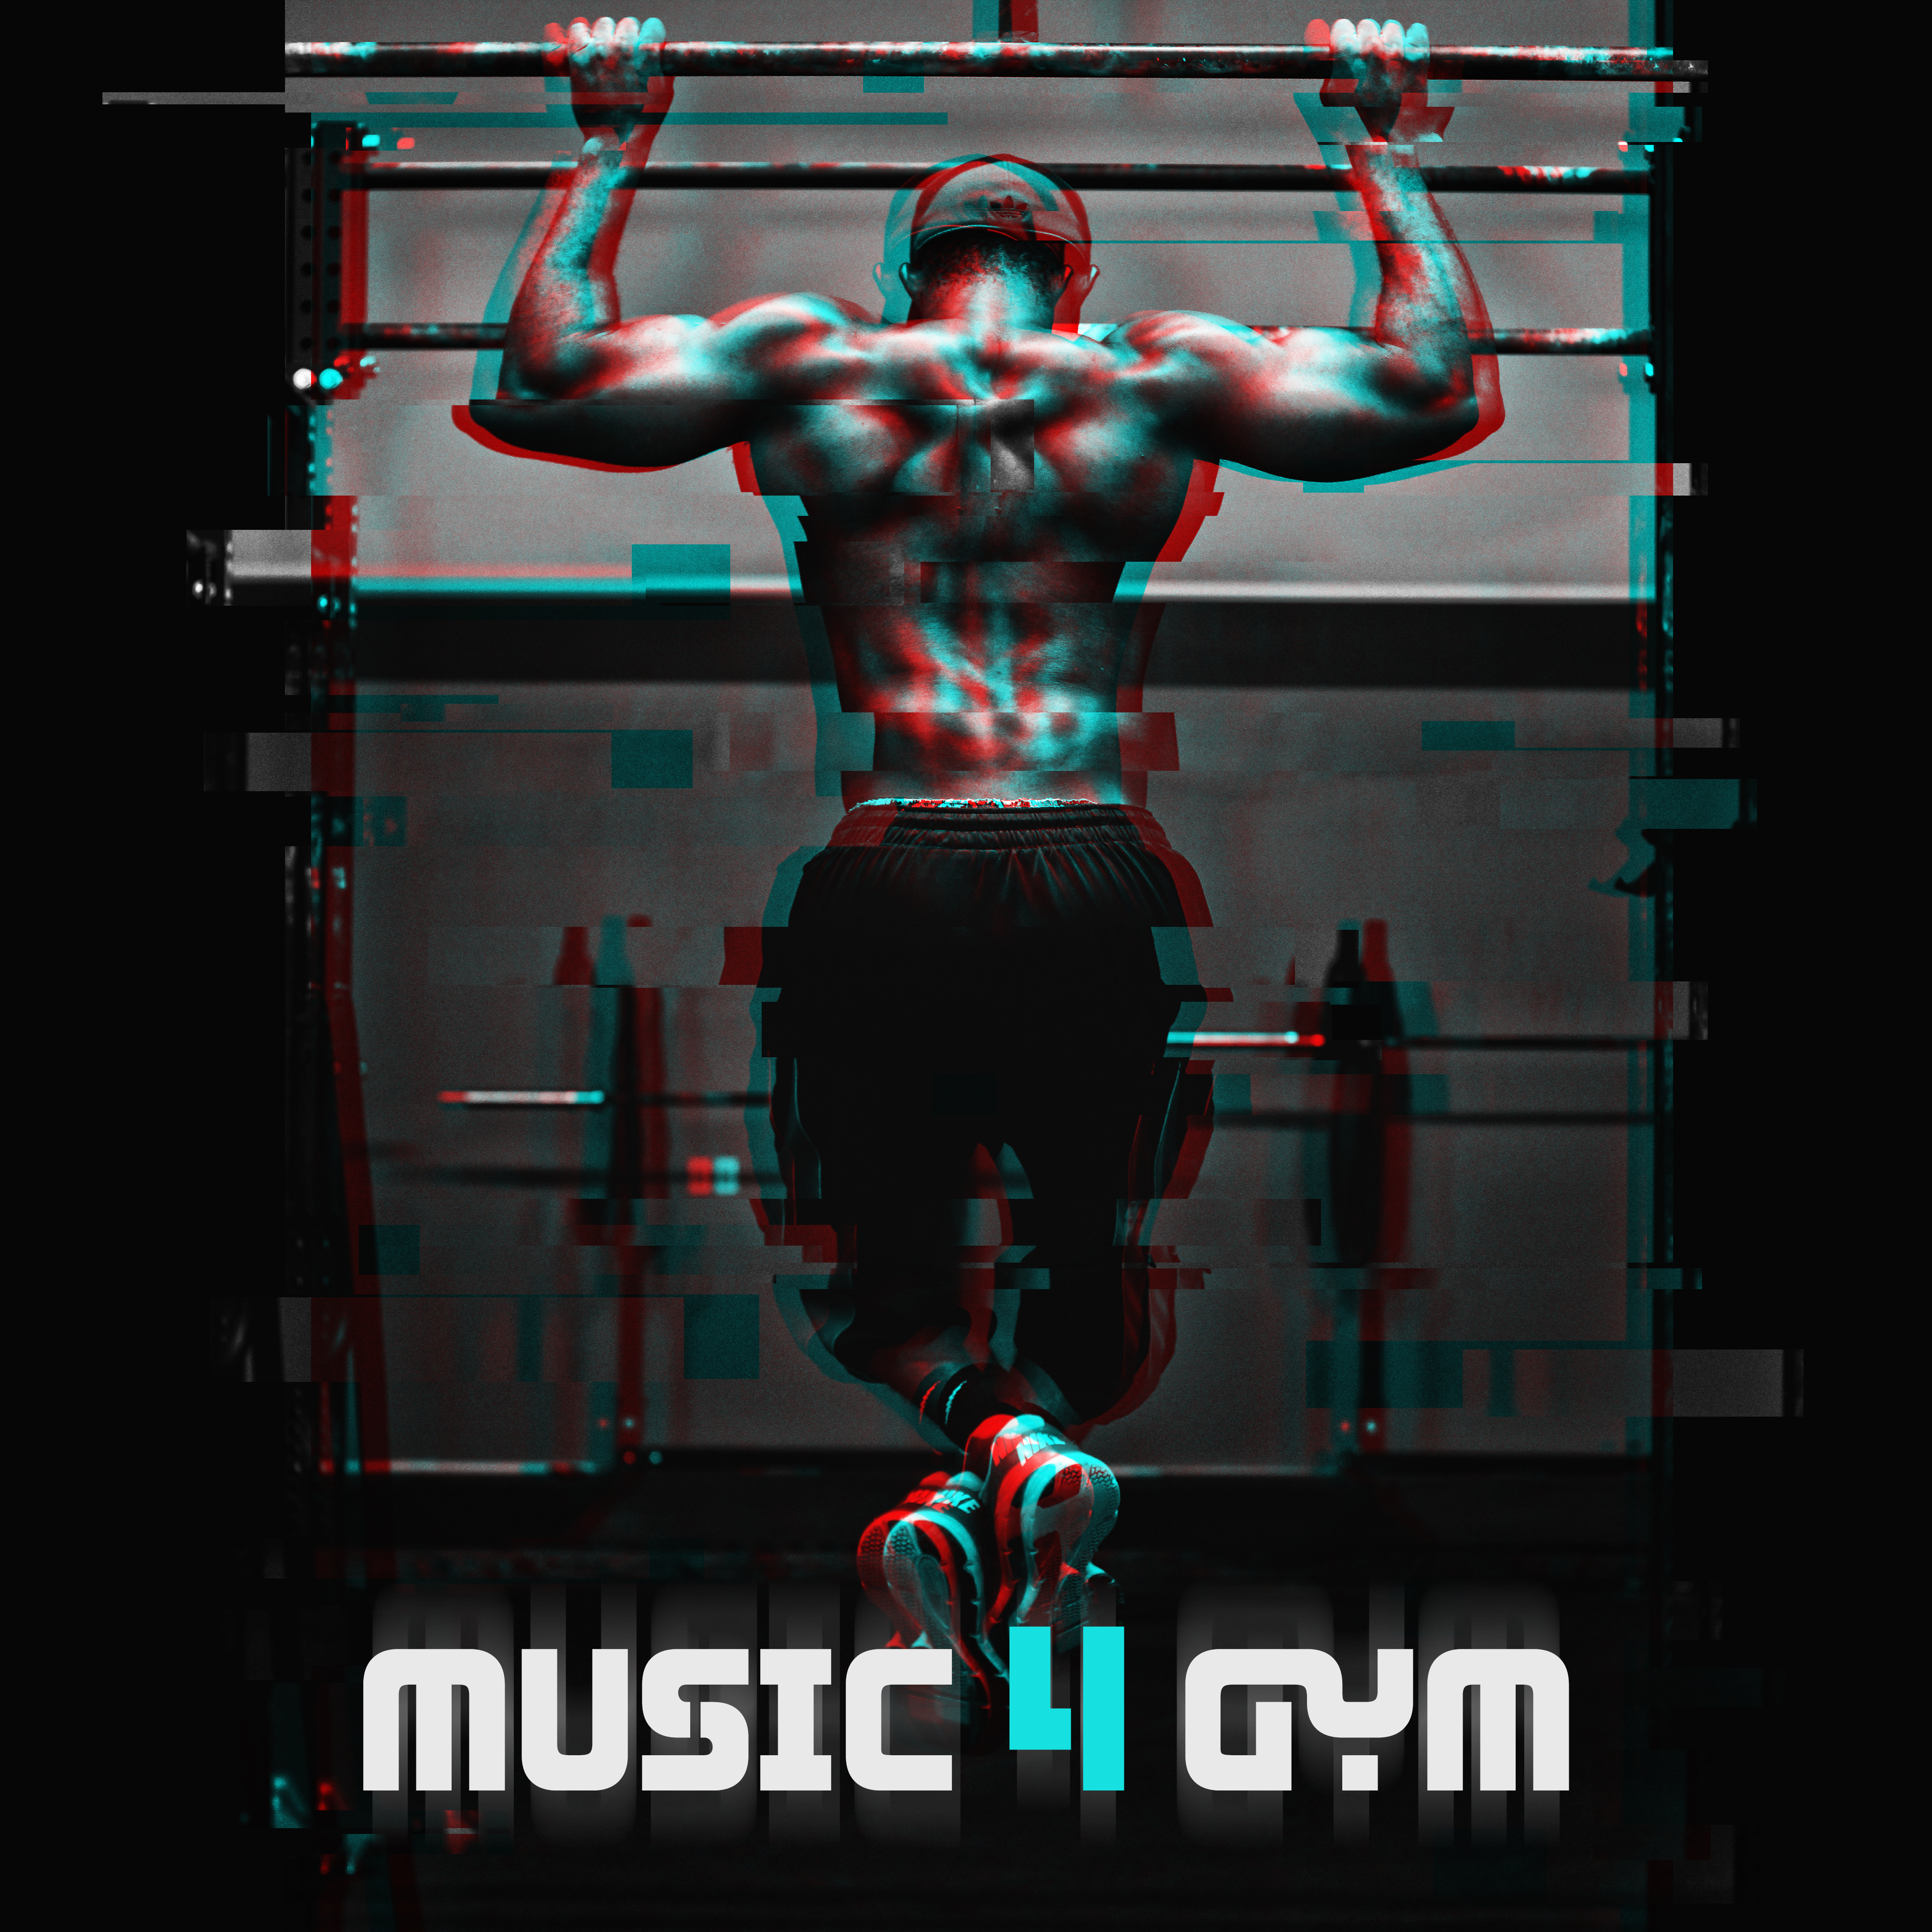 Music 4 Gym – Electronic Chill Out Beats, Music for Gym